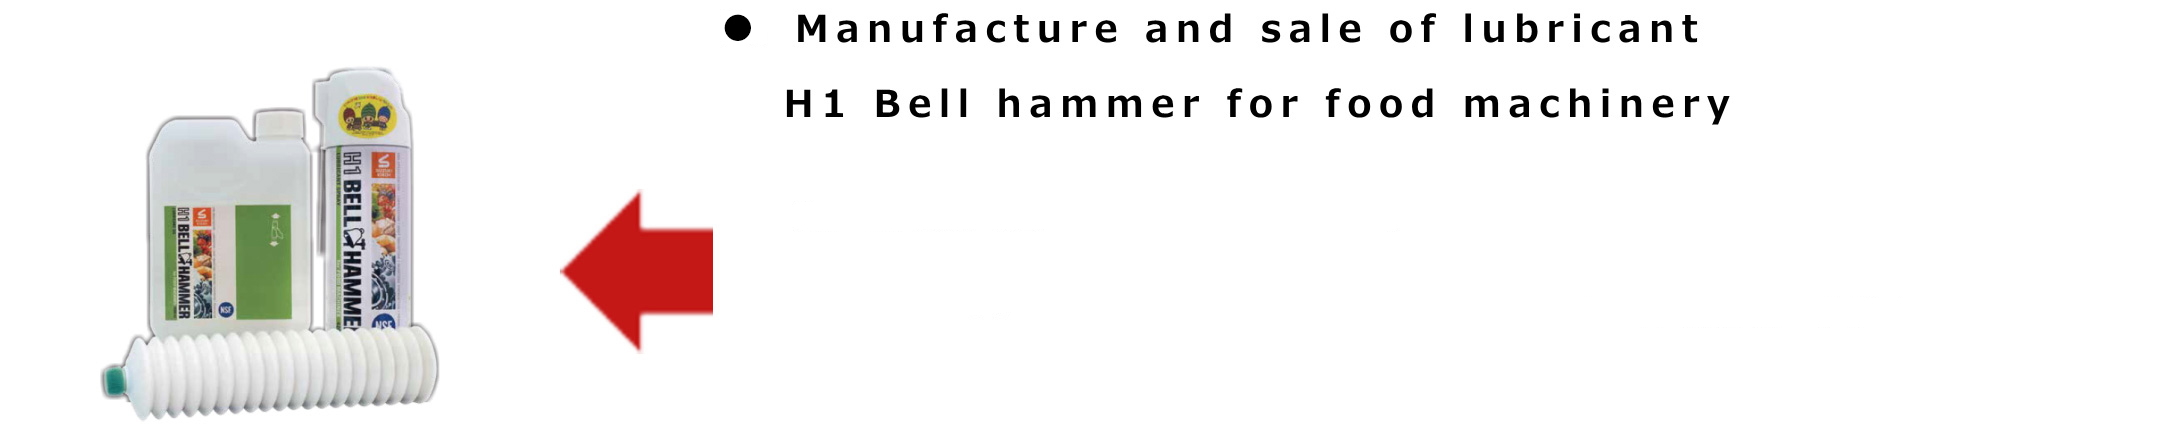 Manufacture and sale of lubricant H1 Bell hammer for food machinery